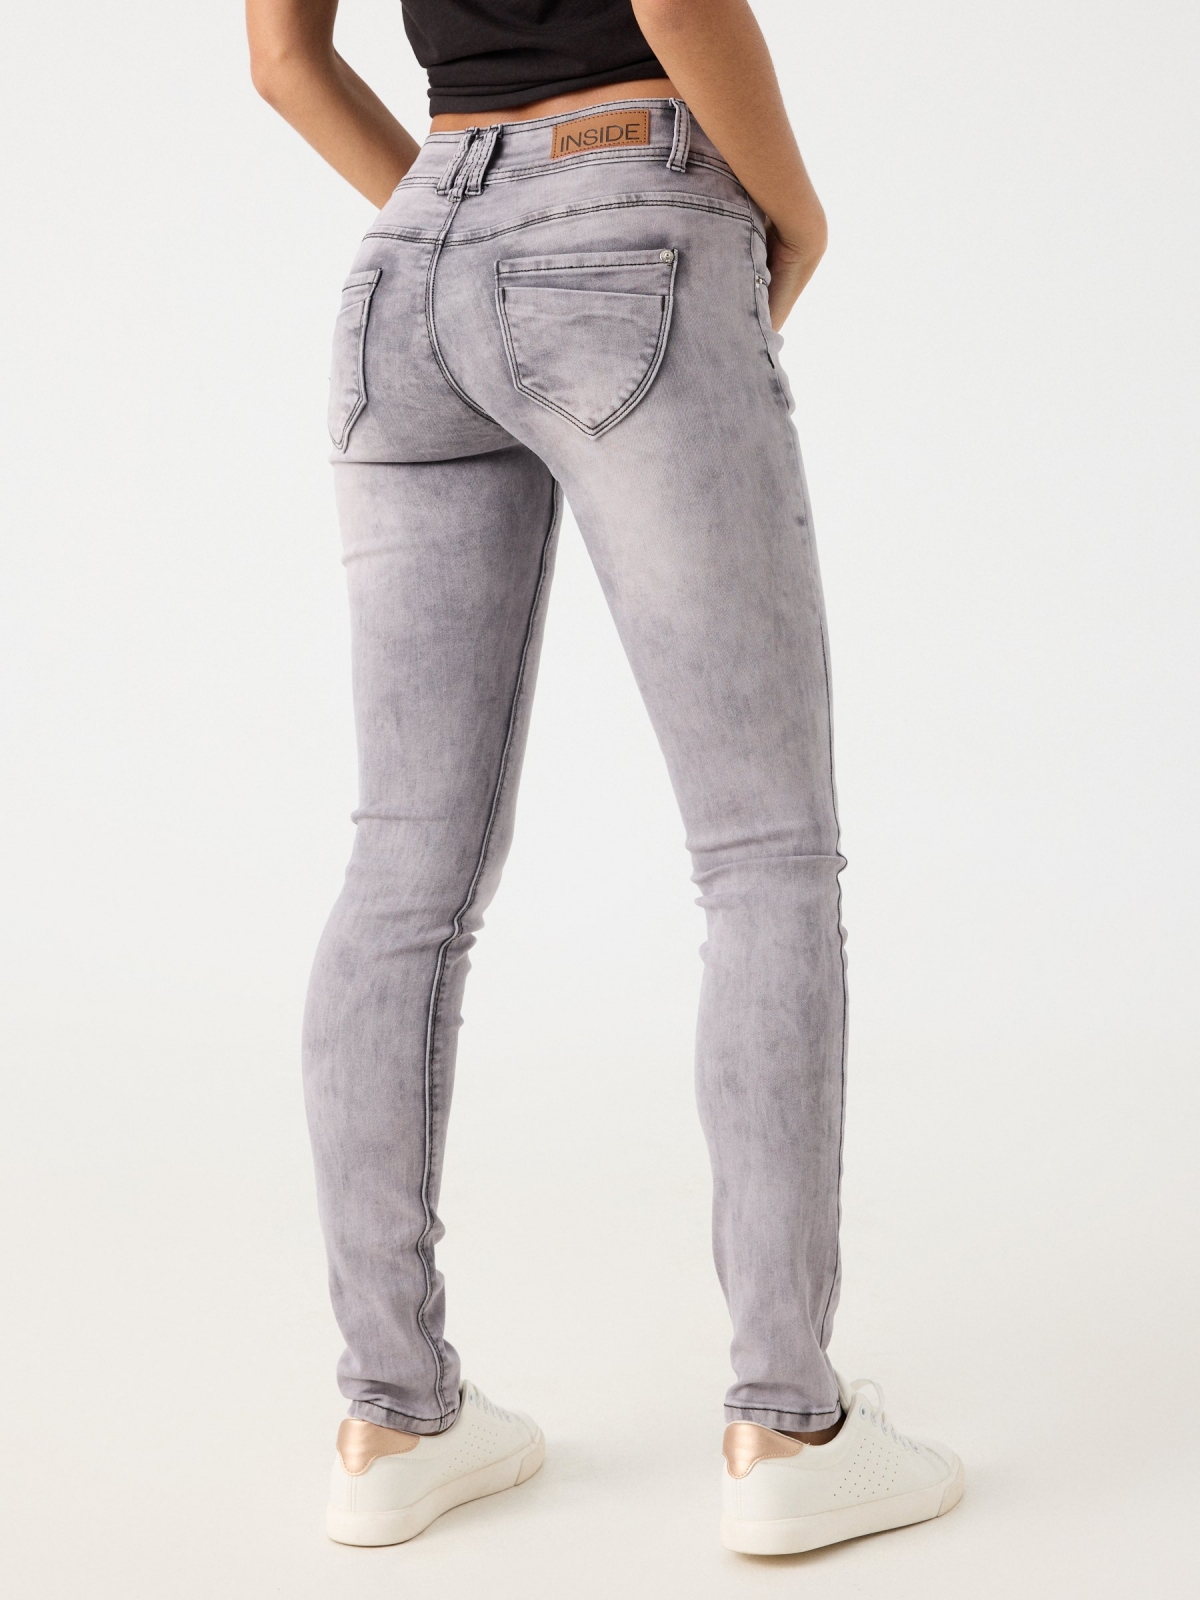 Low rise washed effect skinny jeans light grey middle back view